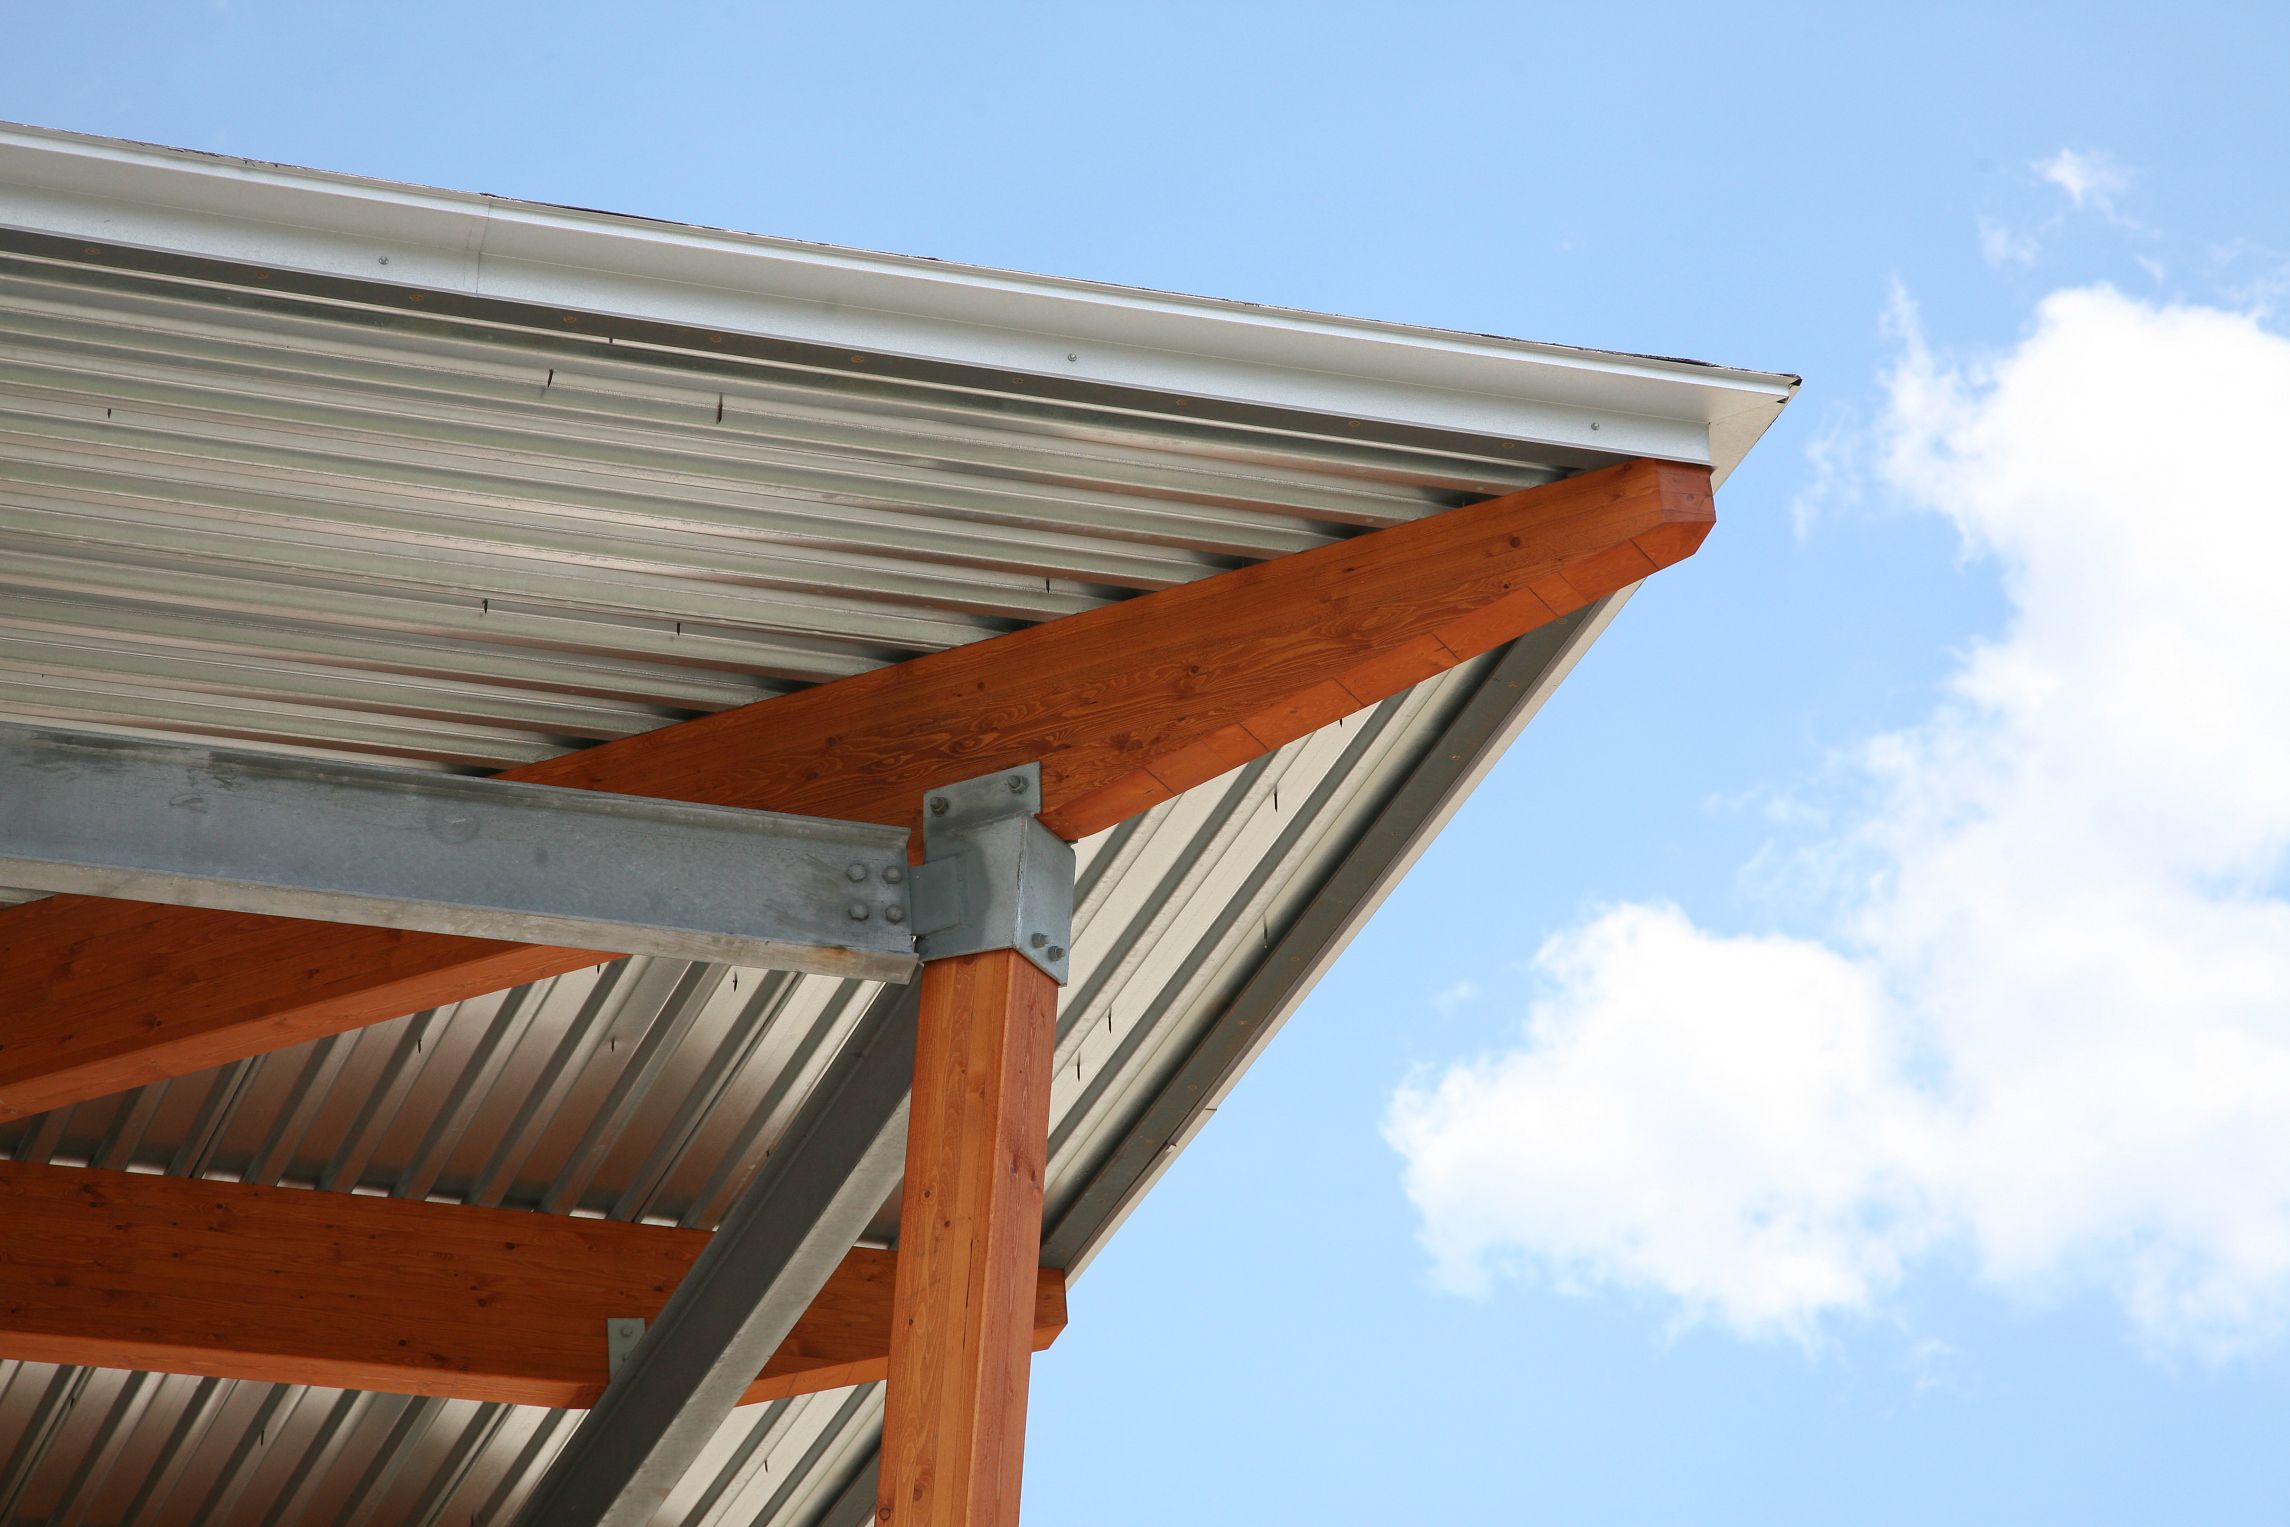 How to Install Corrugated Roof Panels Under a Deck